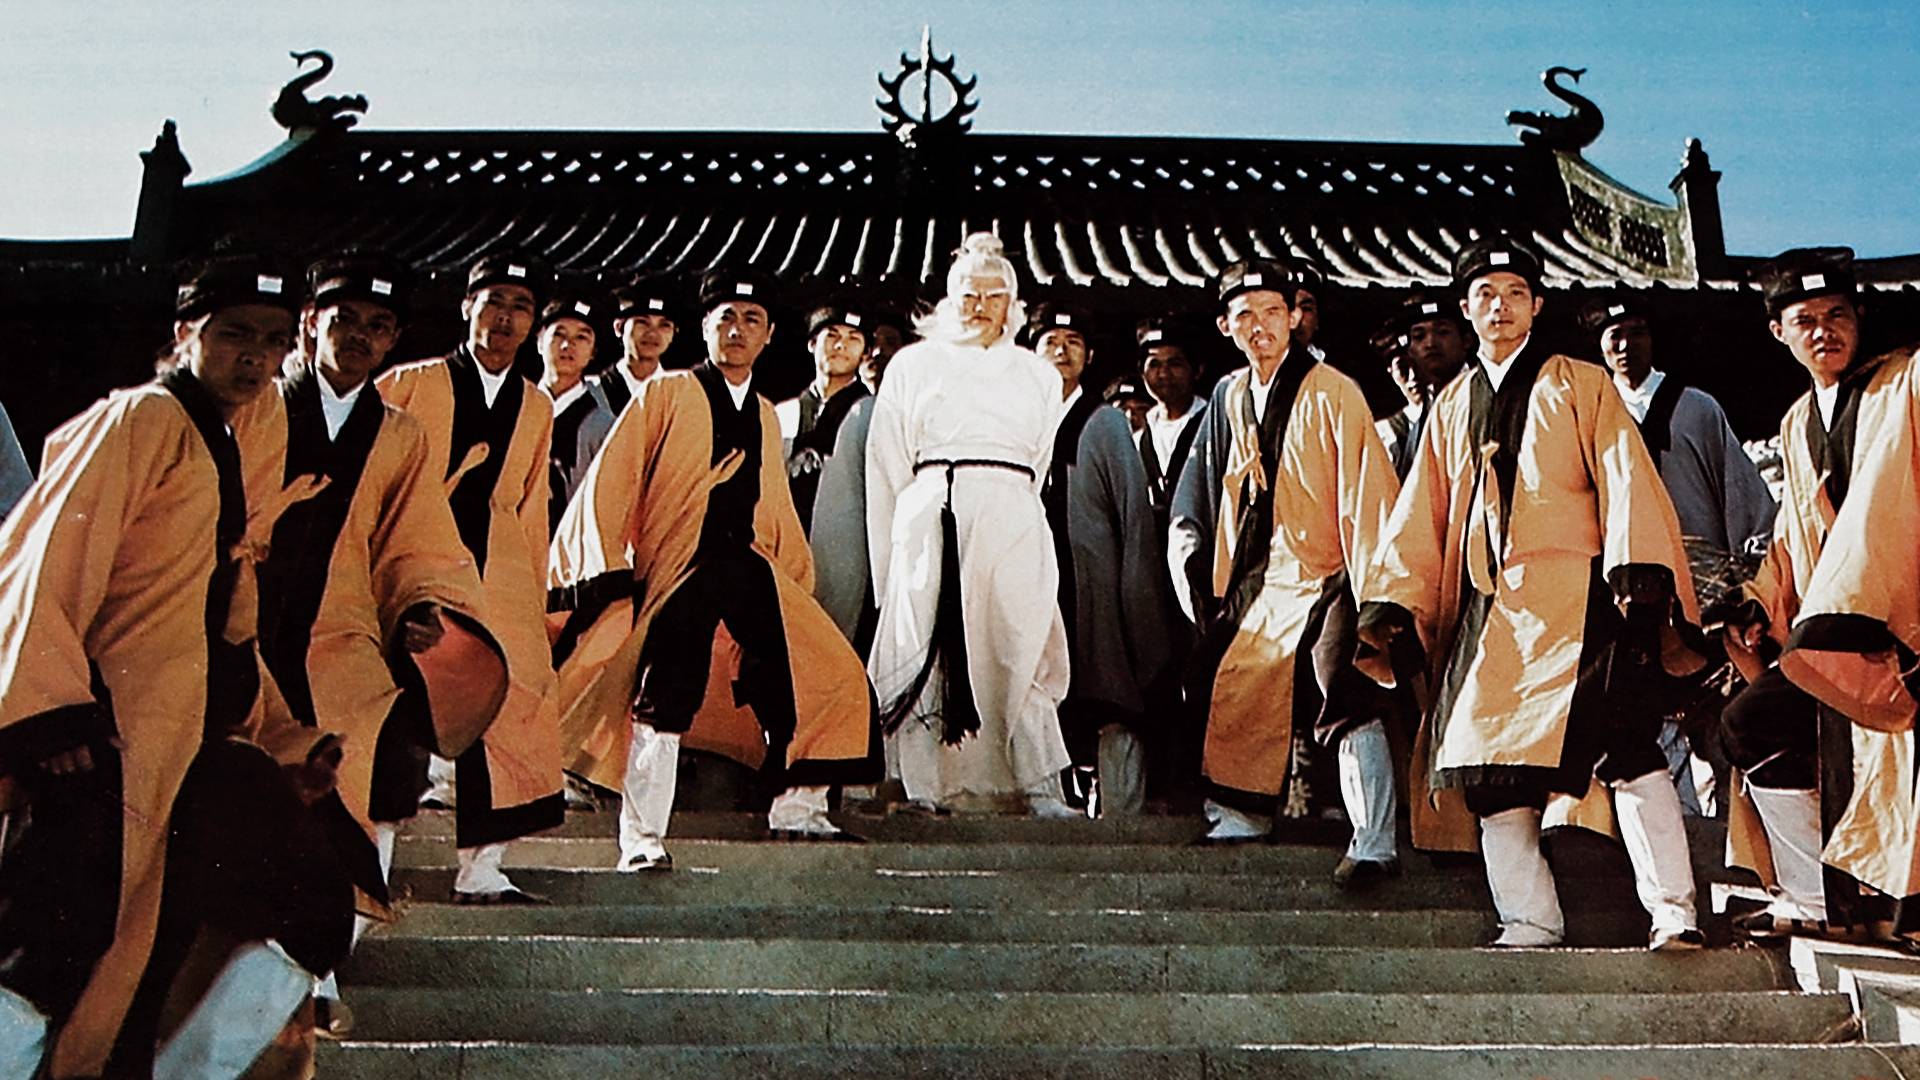 Free download Shaolin Kung Fu Wallpaper Executioners from shaolin [1920x1080] for your Desktop, Mobile & Tablet. Explore Shaolin Kung Fu Wallpaper. Shaolin Kung Fu Wallpaper, Kung Fu Wallpaper, Kung